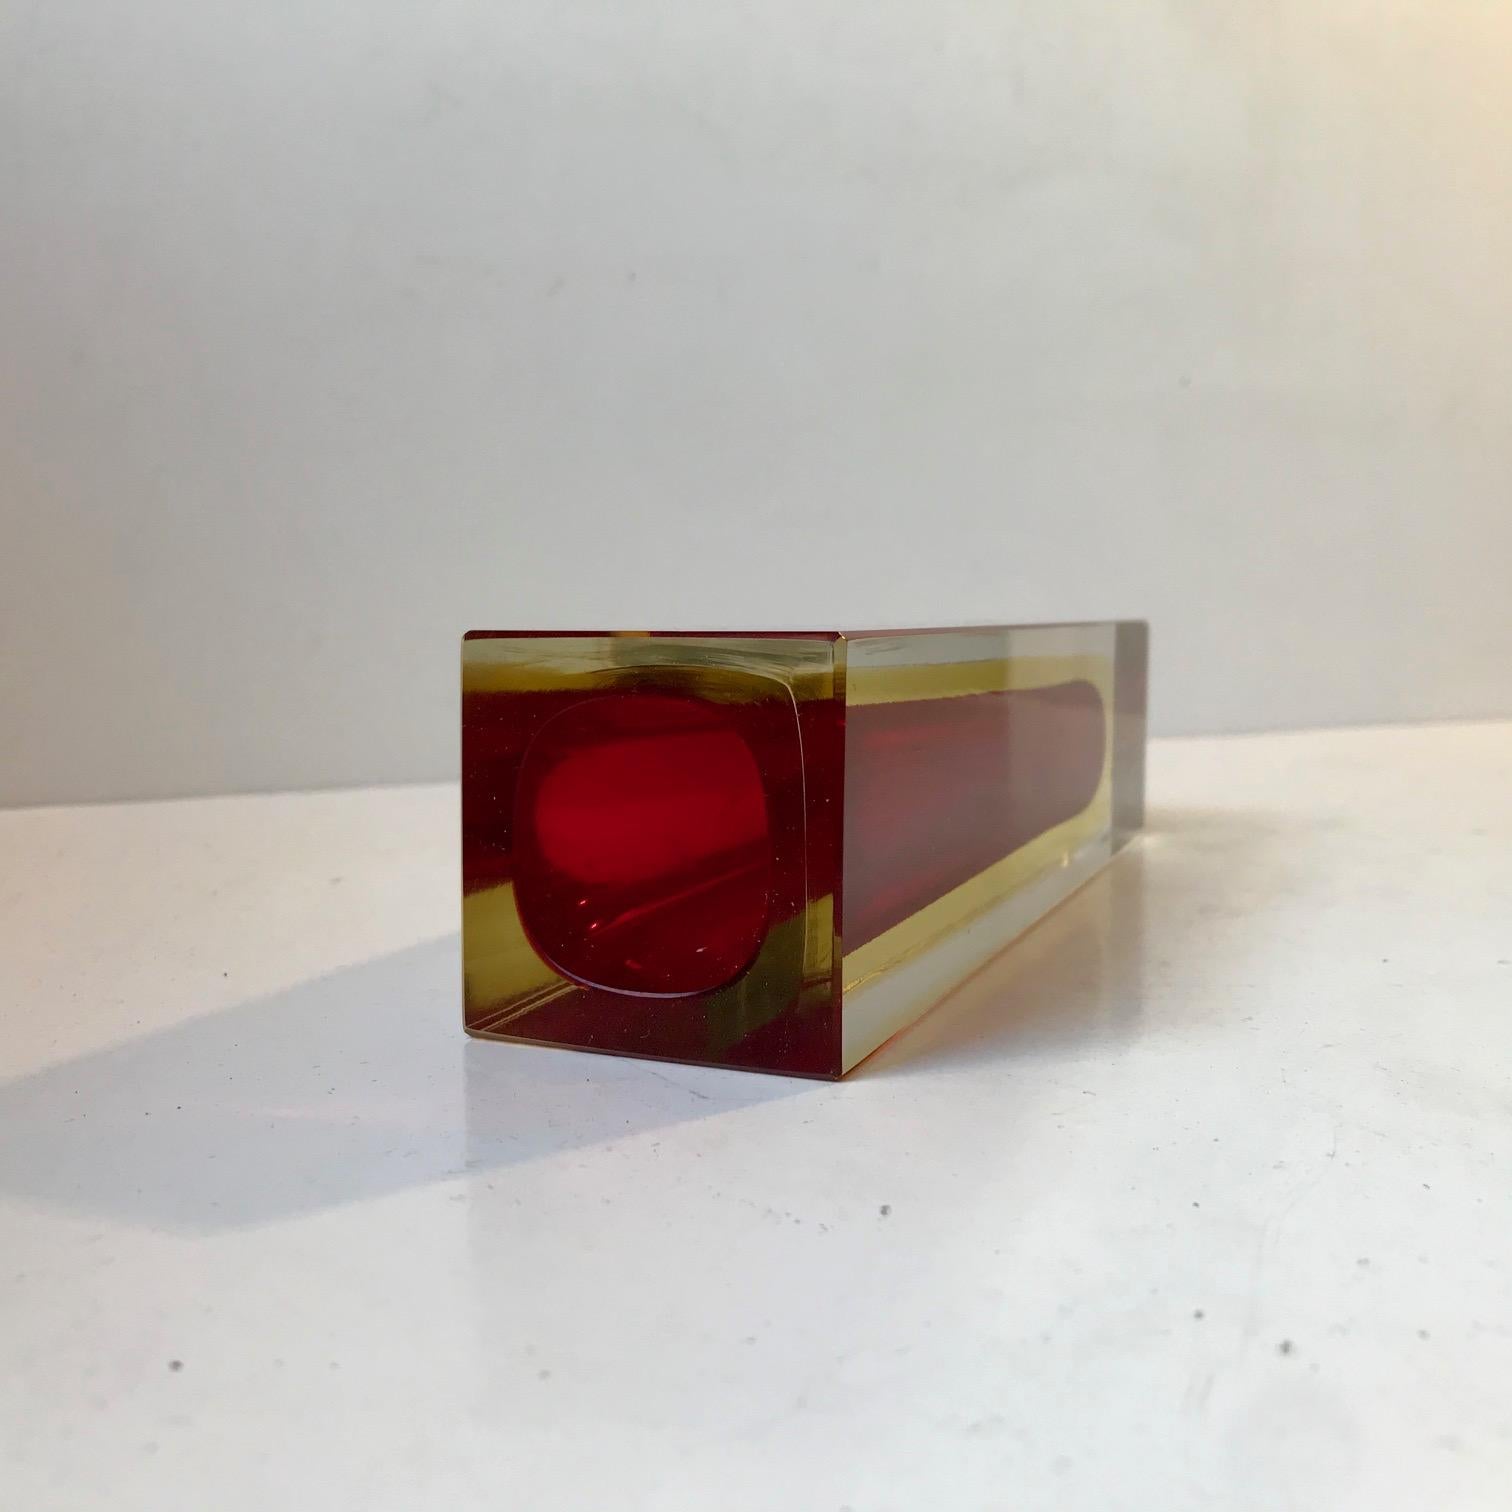 Square and gorgeous Flavio Poli double Sommerso Murano glass vase with red interior surrounded by yellow in a cased clear glass rectangular corpus. Made at Seguso in Italy circa 1960-70. Measure: Height: 20 cm.